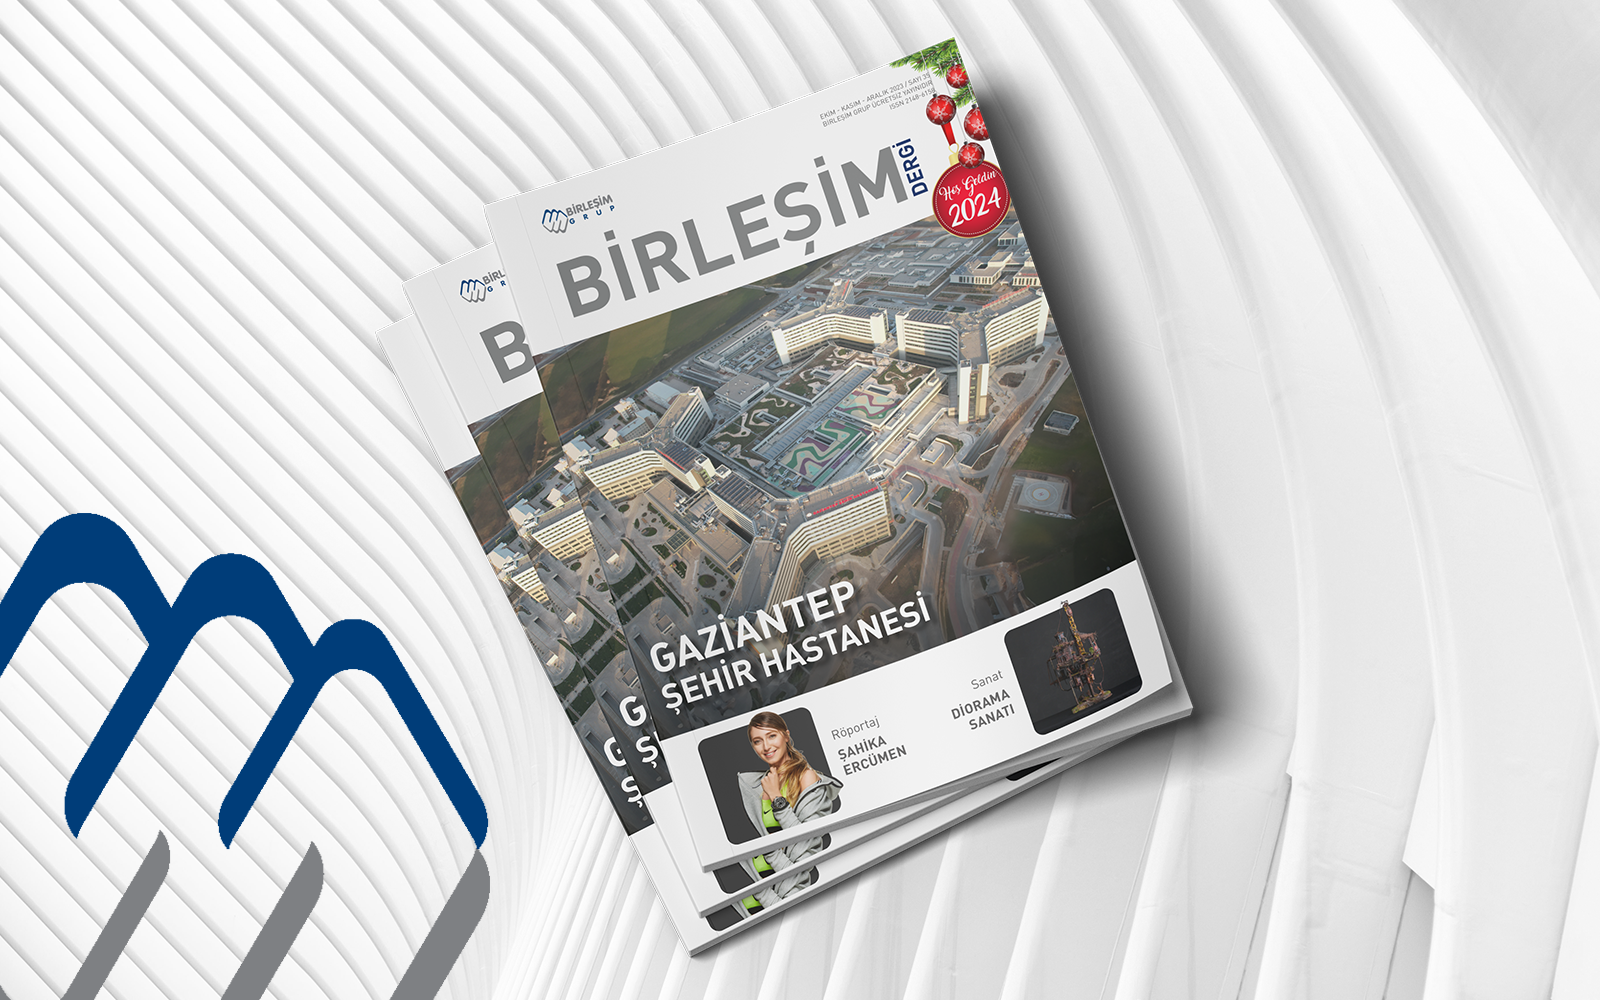 35th issue of Birleşim Dergi has been published